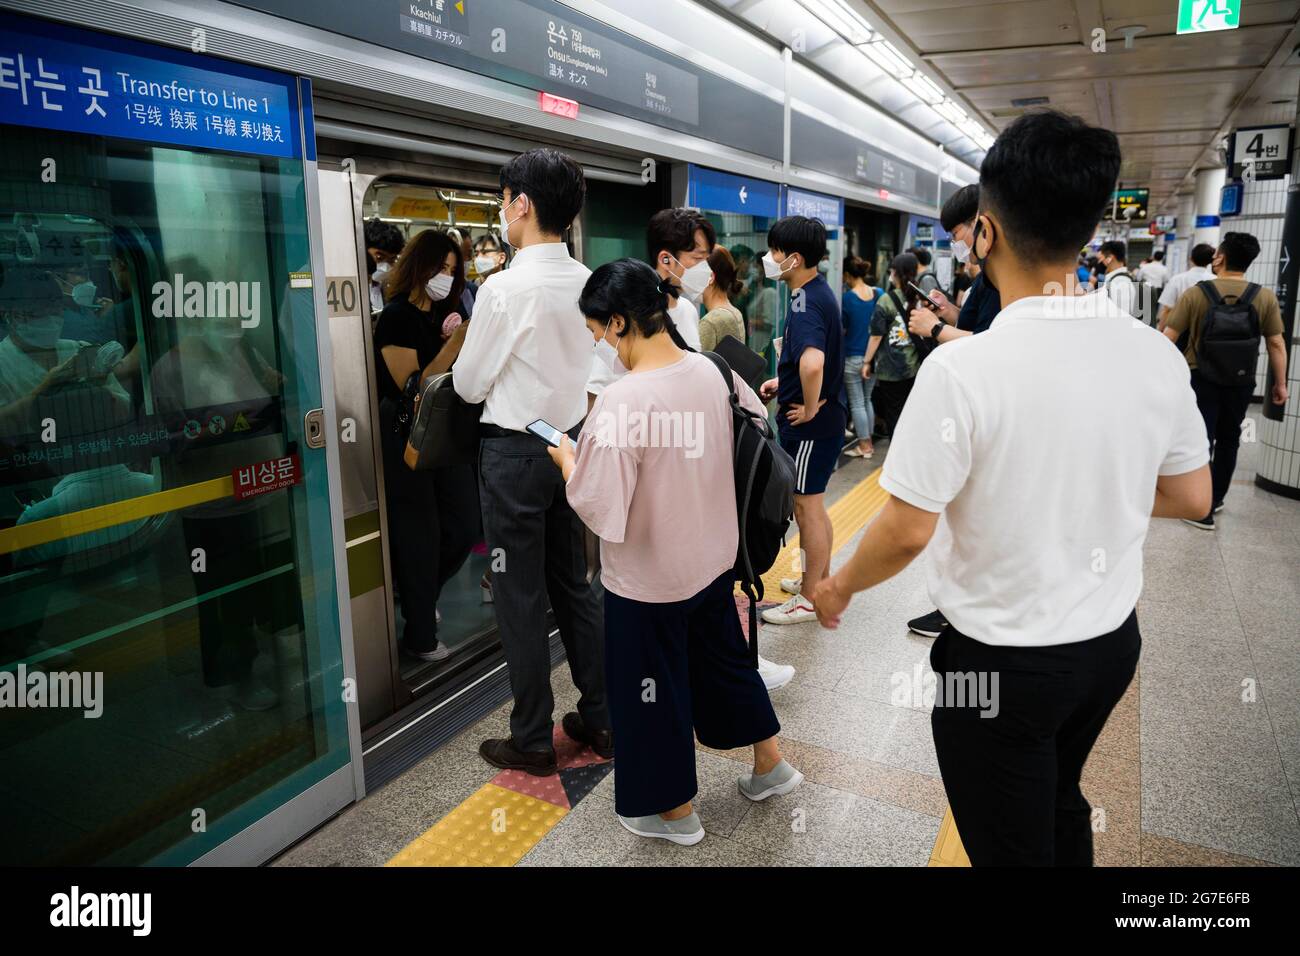 July 13, 2021, Bucheon, Bucheon, South Korea: Subway riders in Seoul rush to board the train as South Korea enters its second day of a quasi-lockdown amid a record surge in coronavirus outbreaks. (Credit Image: © Jintak Han/ZUMA Wire) Stock Photo